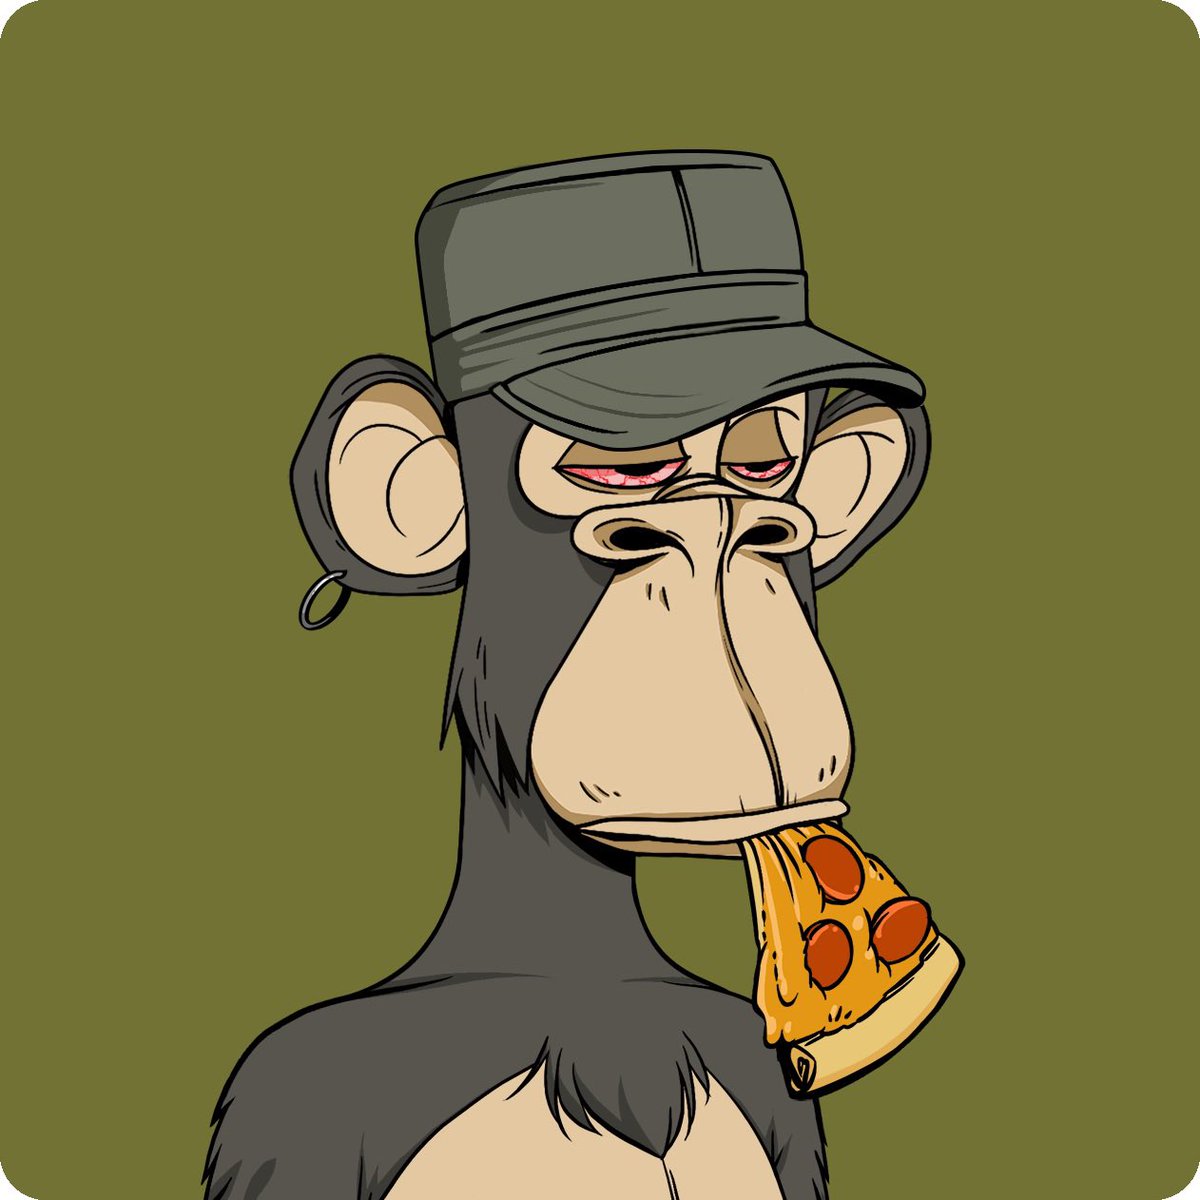 Happy #NationalPizzaDay ! Where are our beloved pizza apes? BAYC#7840 contributed by @FluctHydro